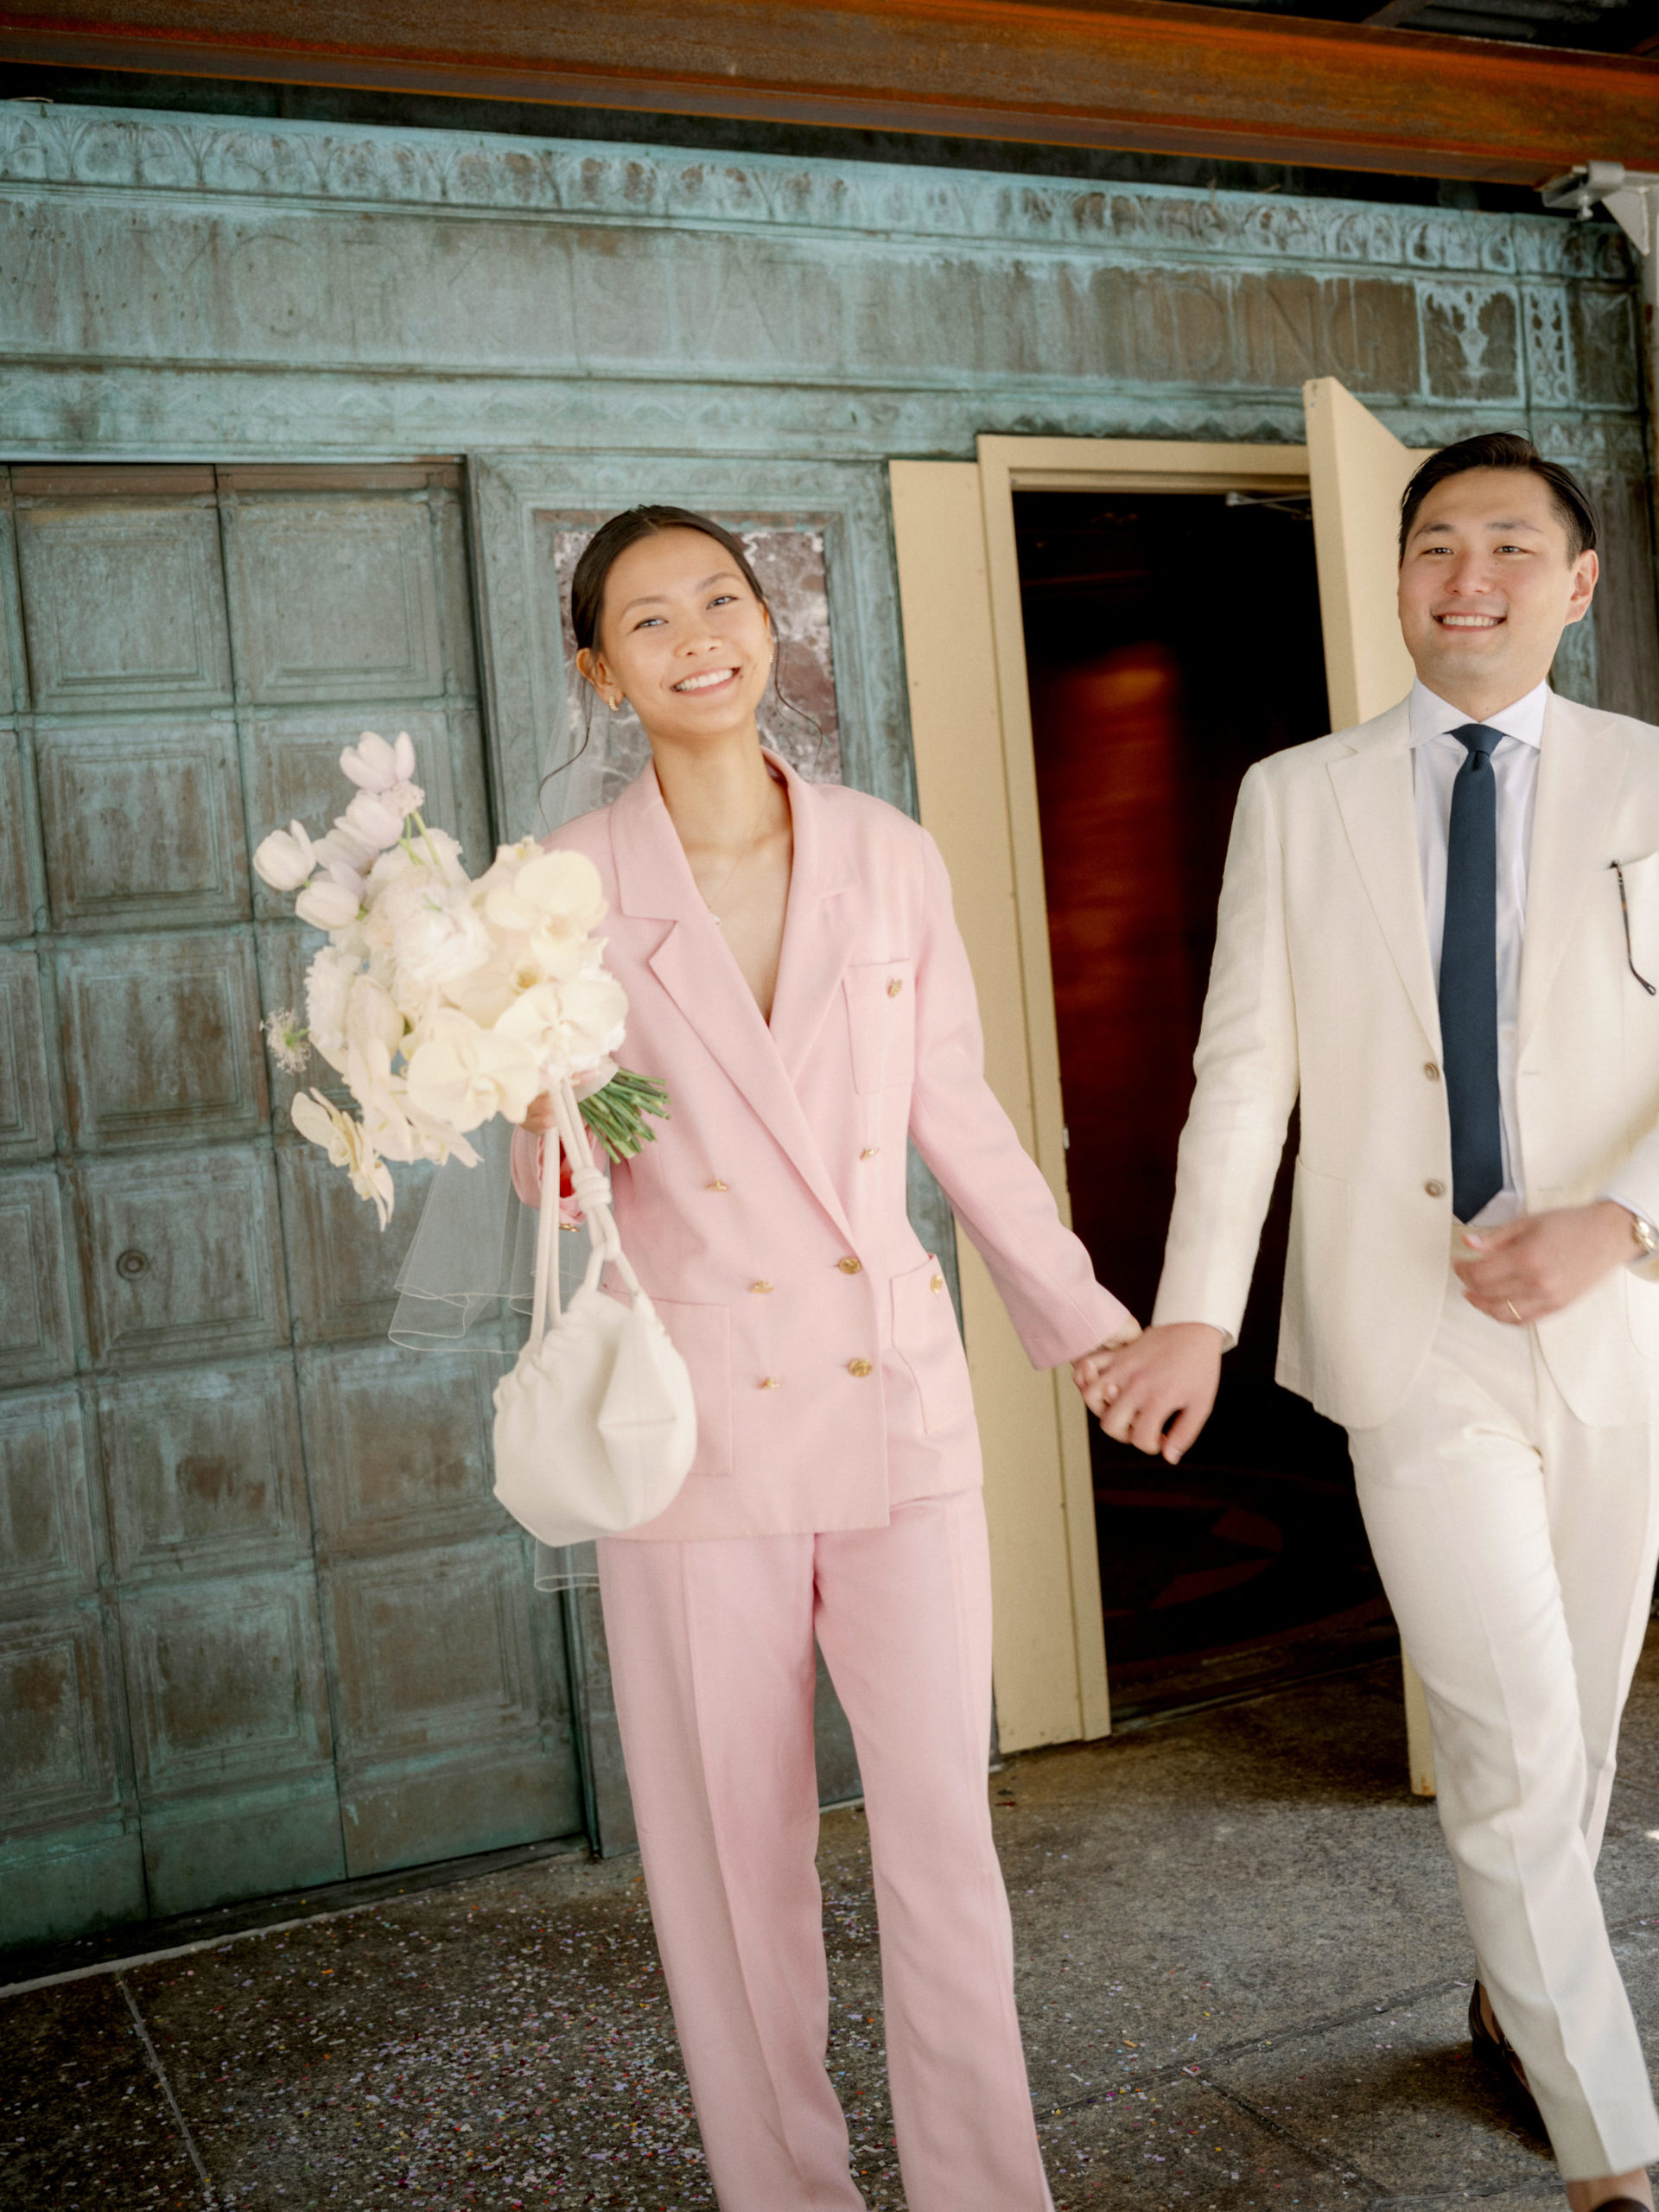 The newlyweds went out of the exit door at the NYC Marriage Bureau. Image by Jenny Fu Studio 